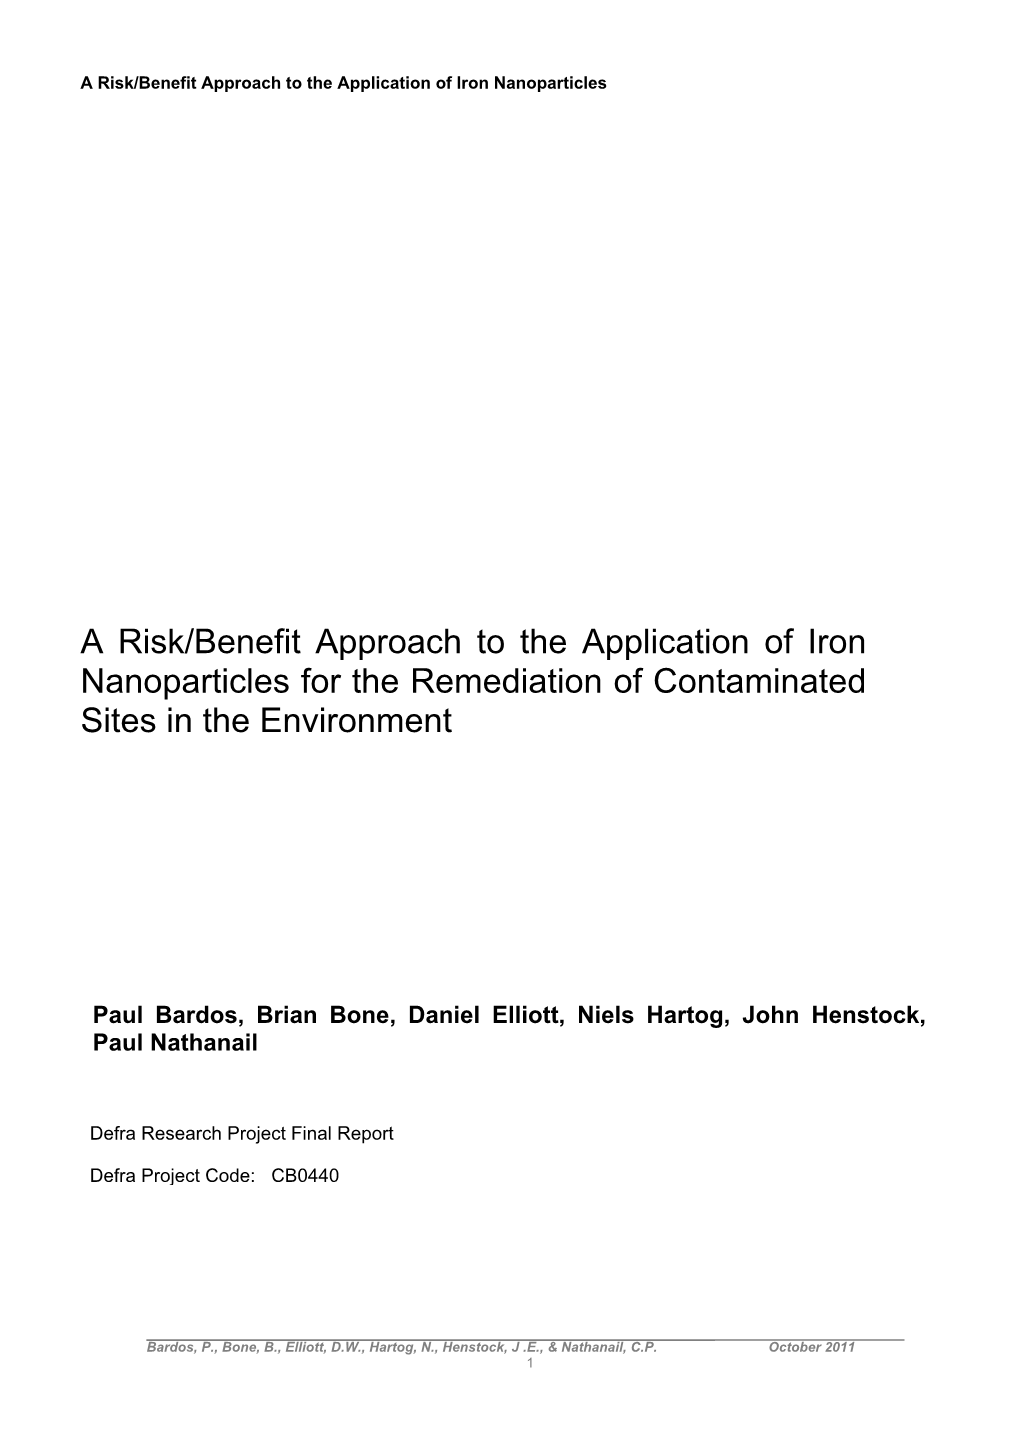 A Risk/Benefit Approach to the Application of Iron Nanoparticles for the Remediation of Contaminated Sites in the Environment